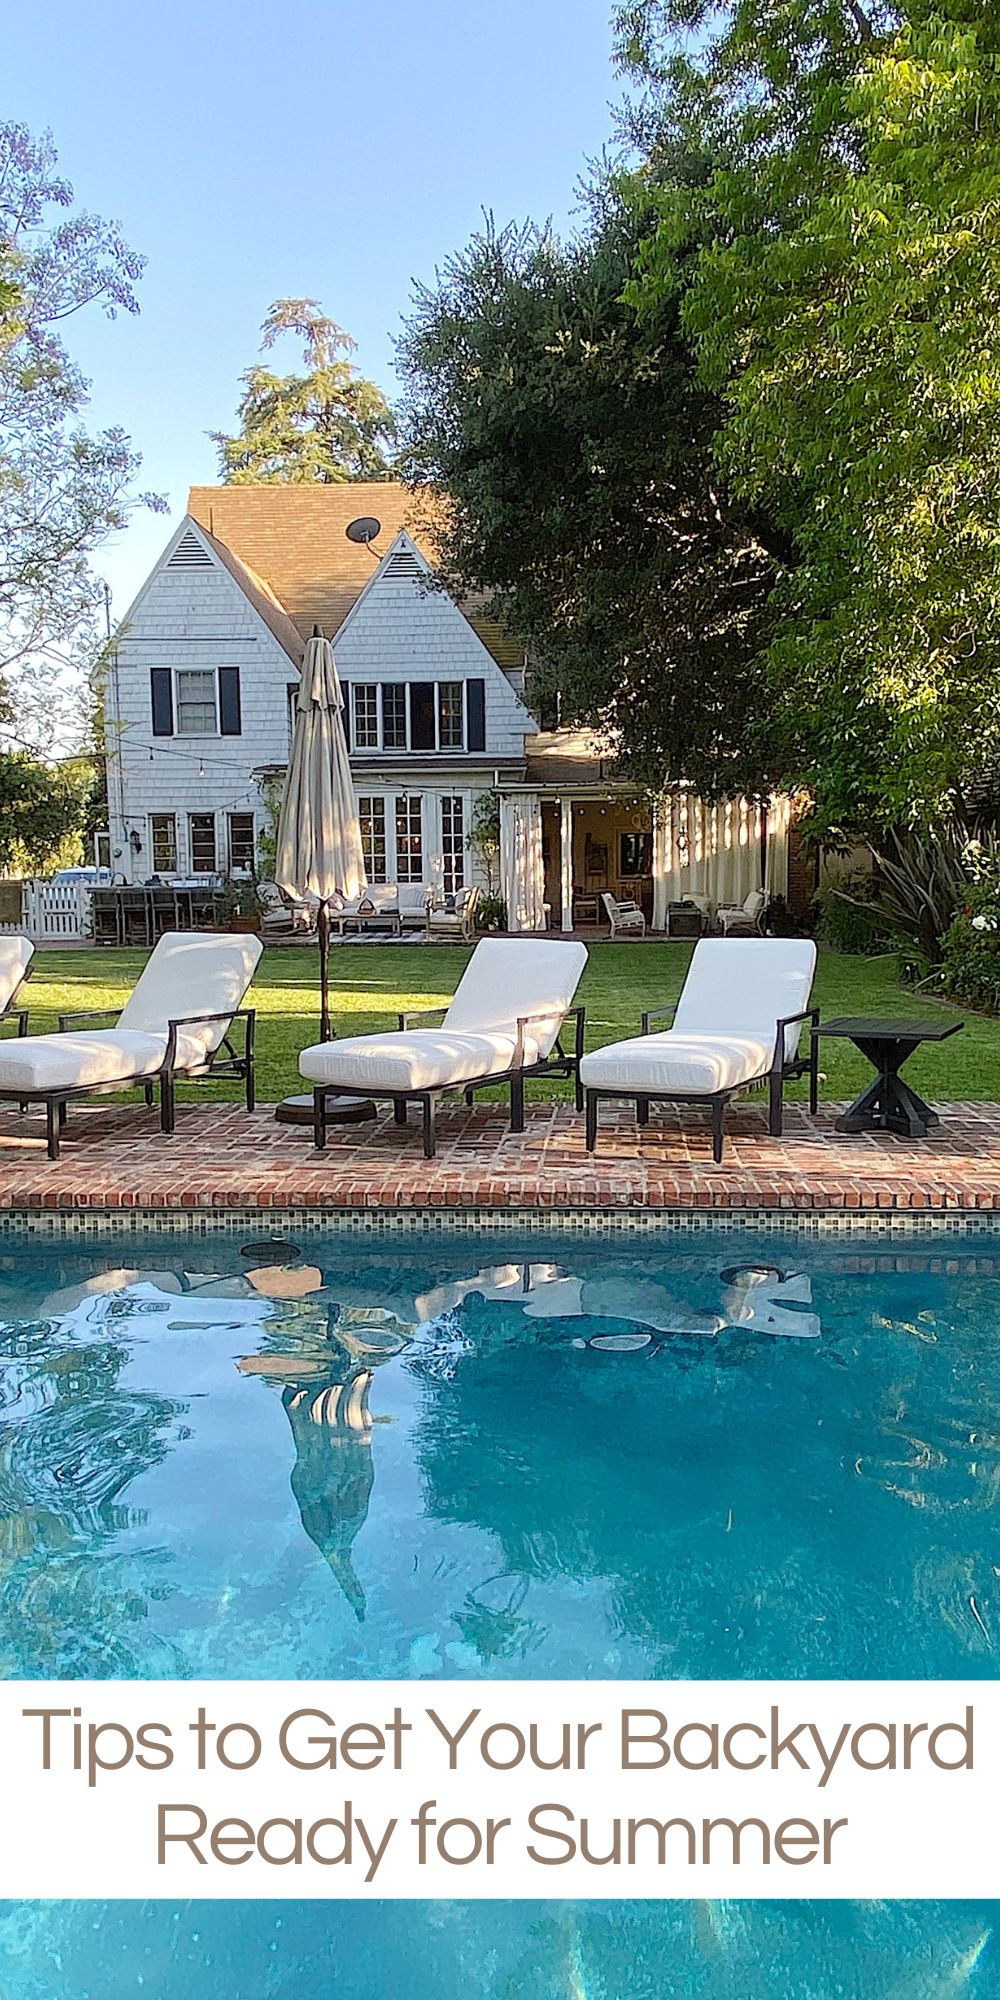 It's almost June and summer is almost here. Today I am sharing tips to help you get your backyard ready for summer and a pool party.